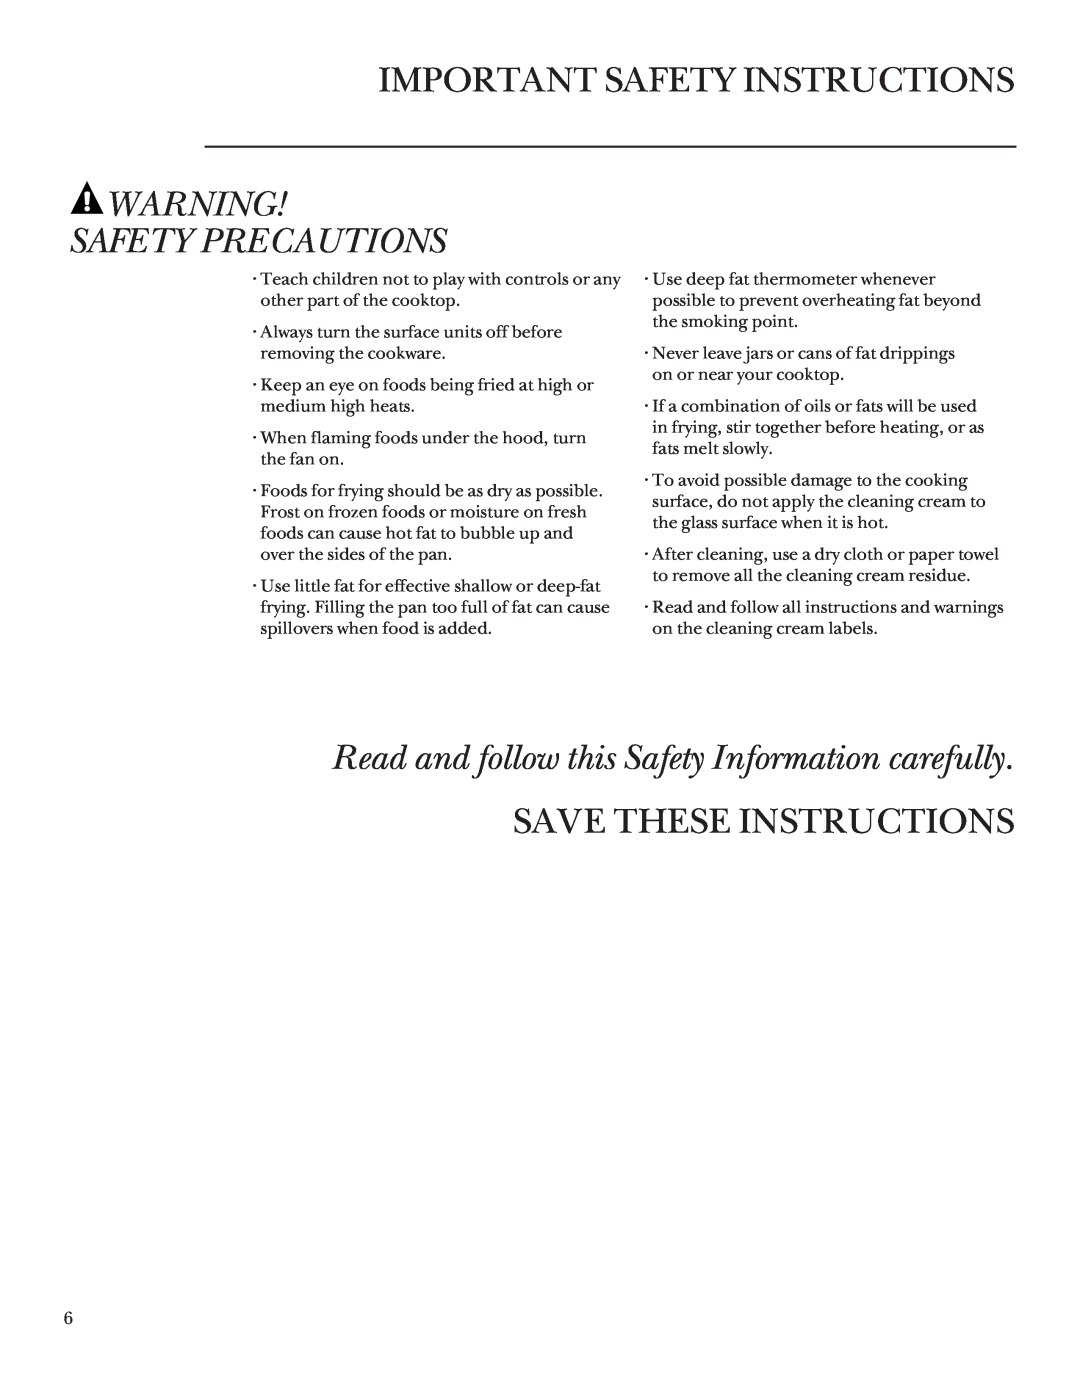 GE Monogram Halogen/Radiant Cooktop manual Read and follow this Safety Information carefully, Save These Instructions 